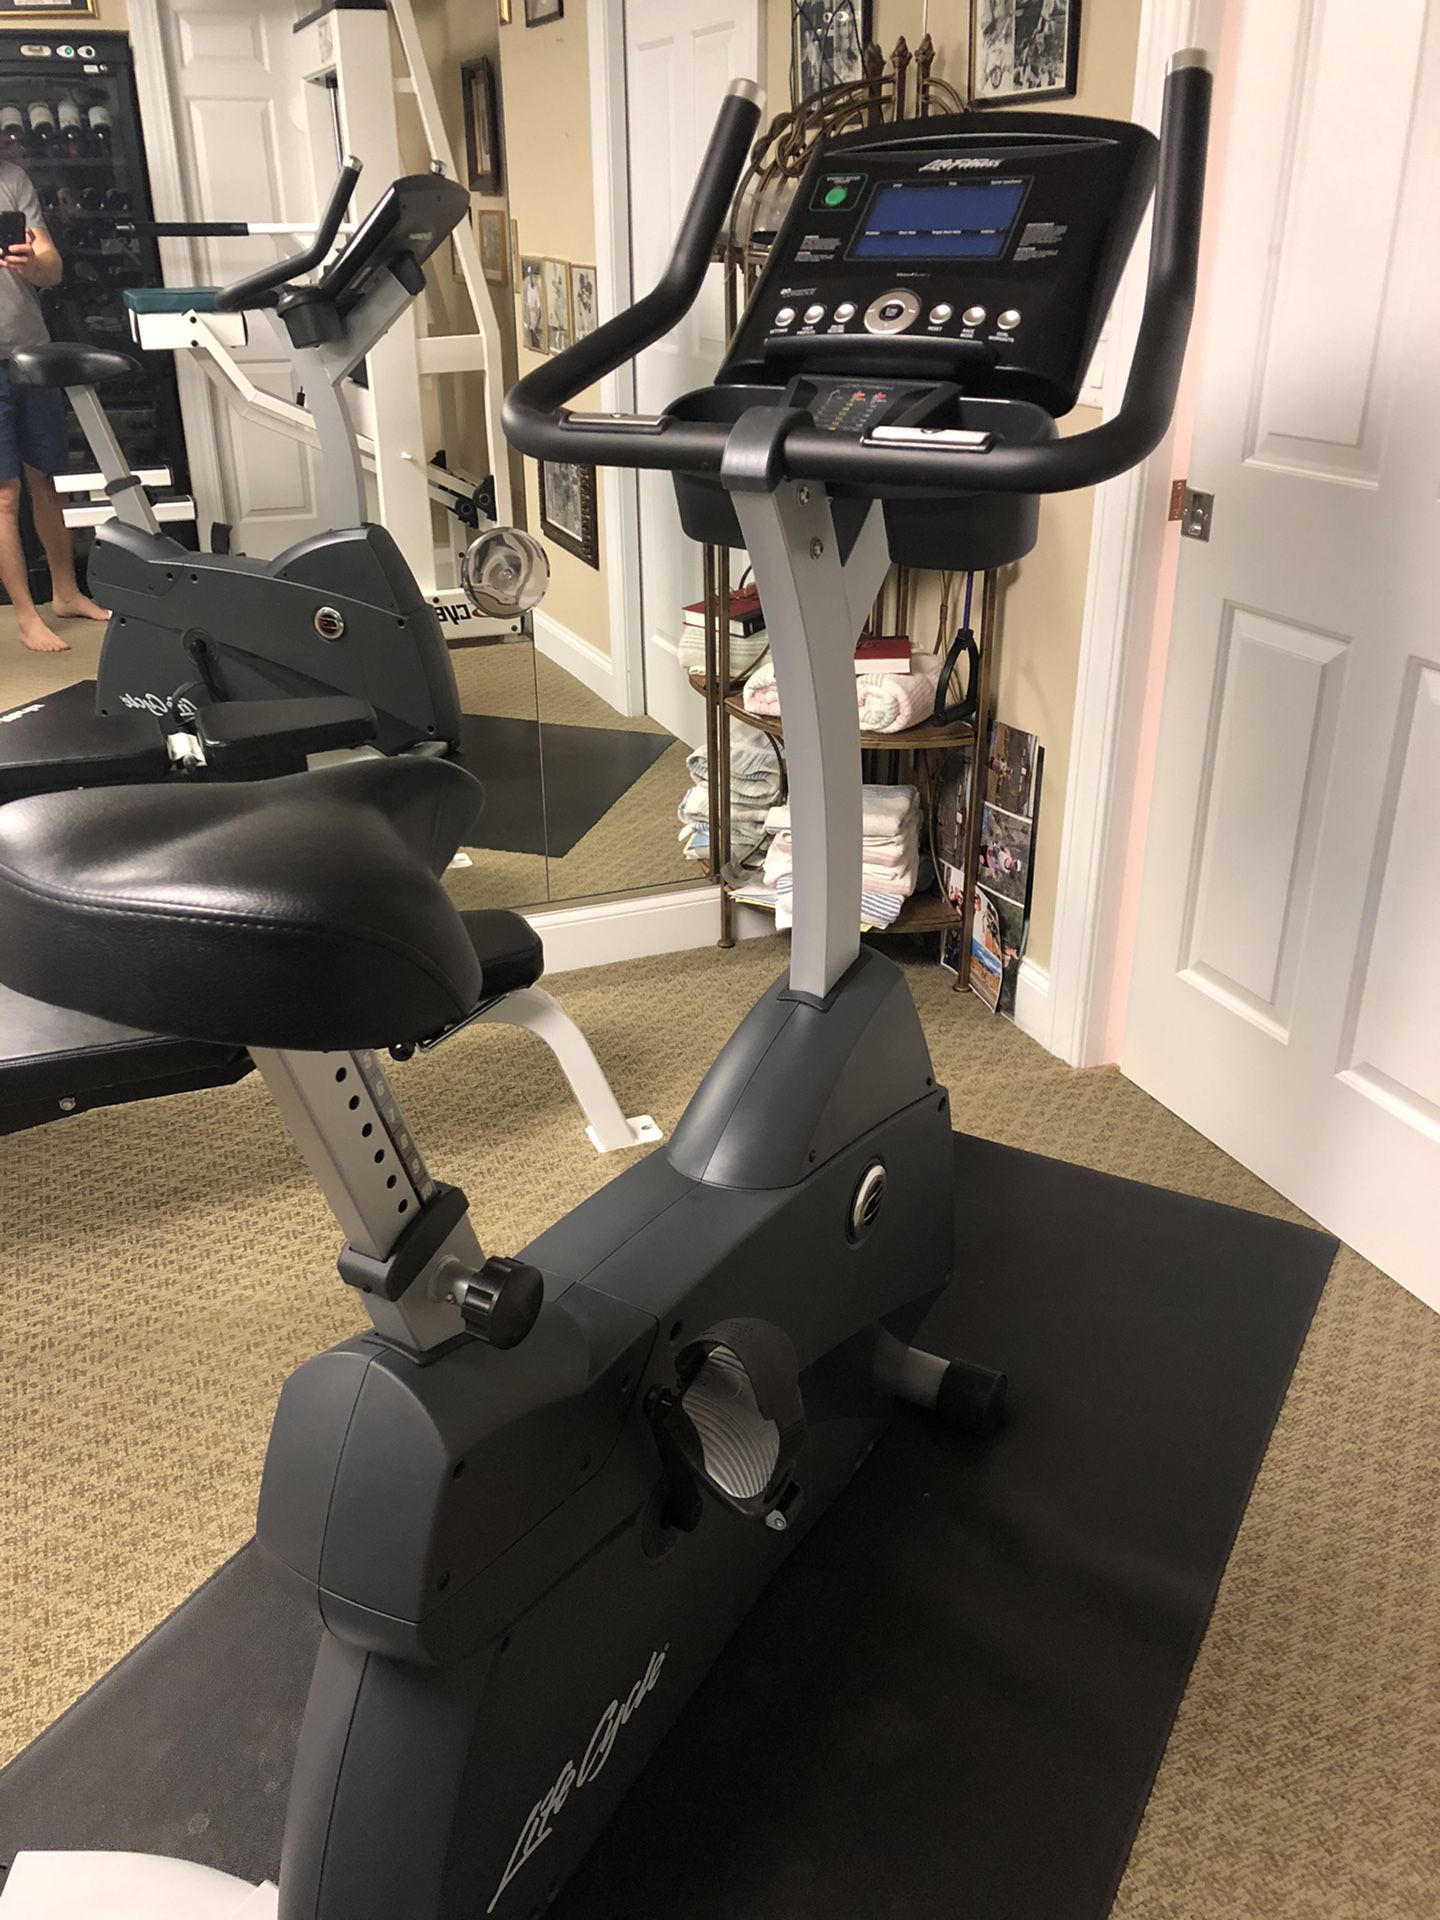 Life cycle exercise bike - just like the gym